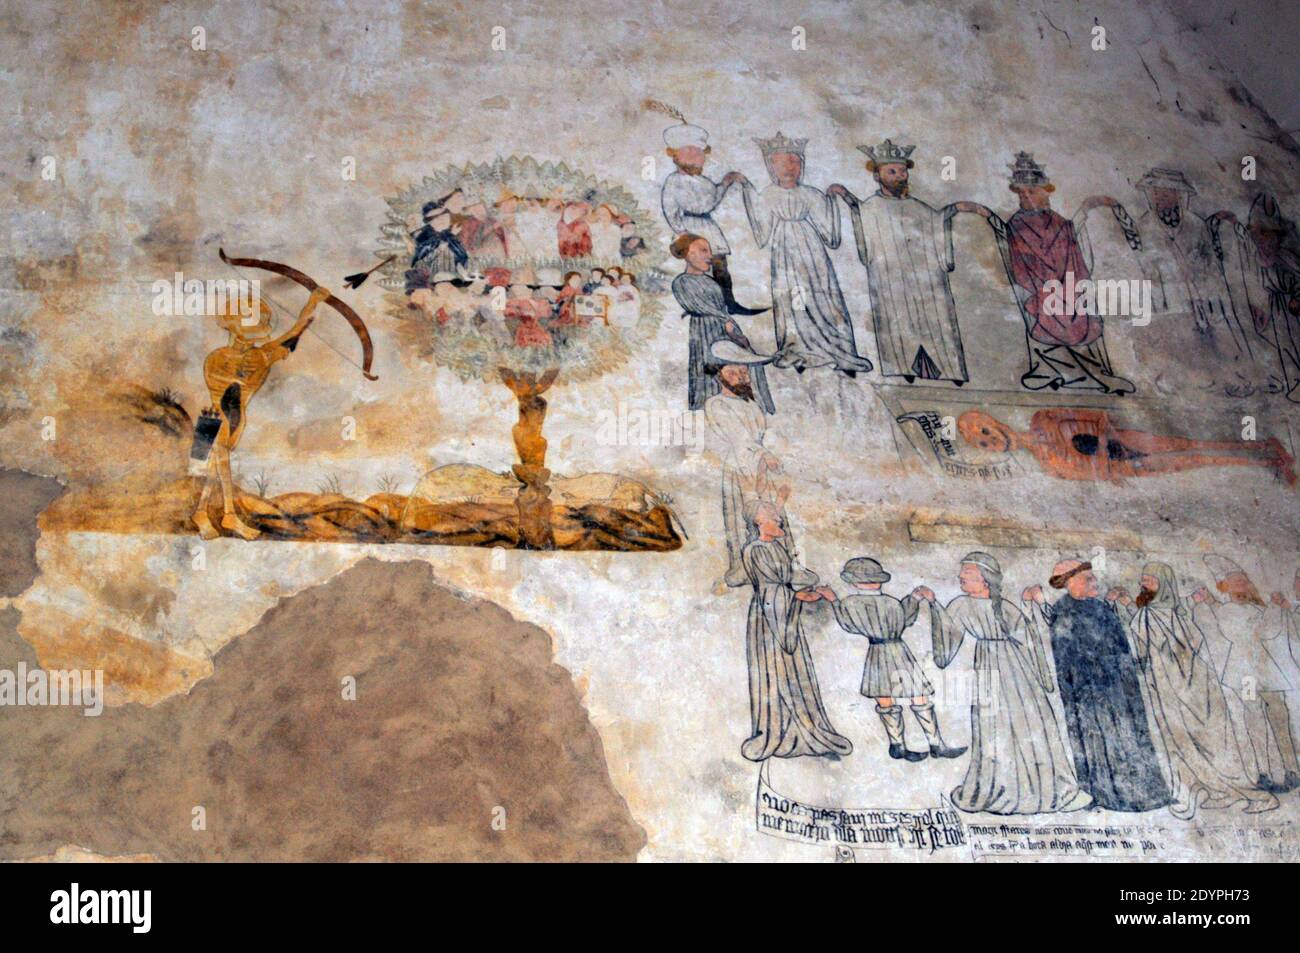 Dance of the death painting. Morella, Castellón, Spain Stock Photo